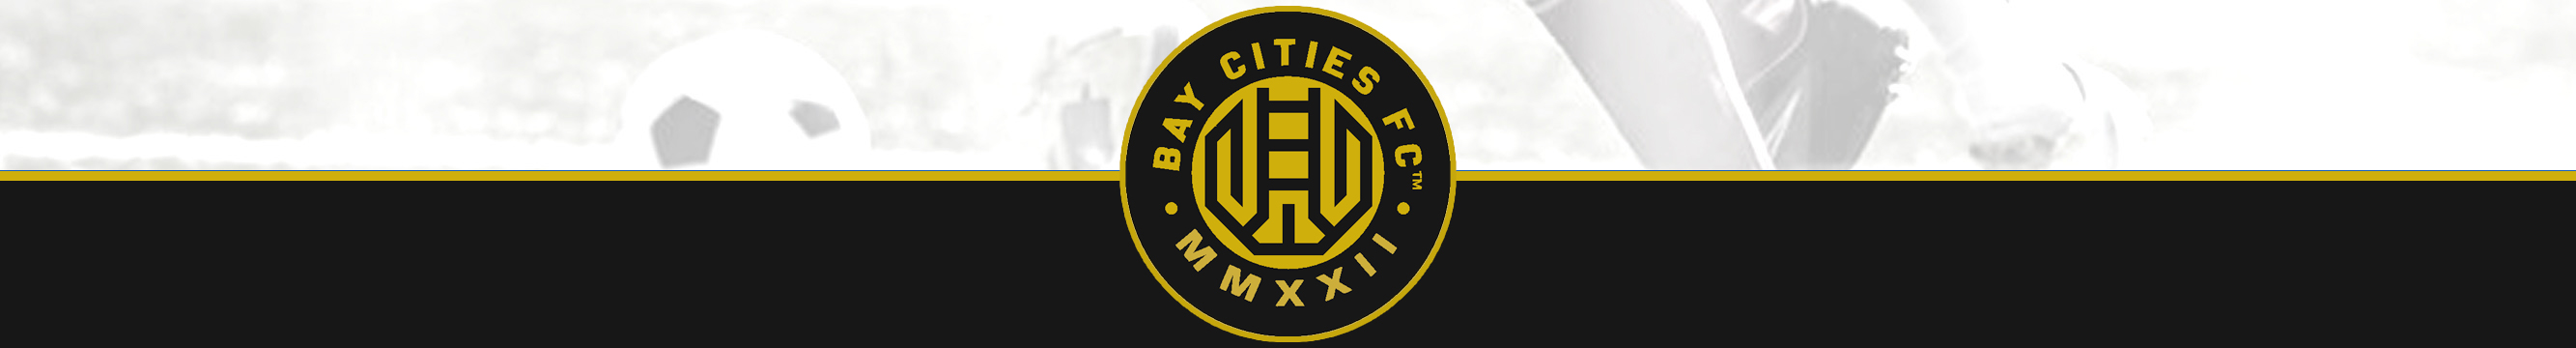 Bay Cities FC Banner